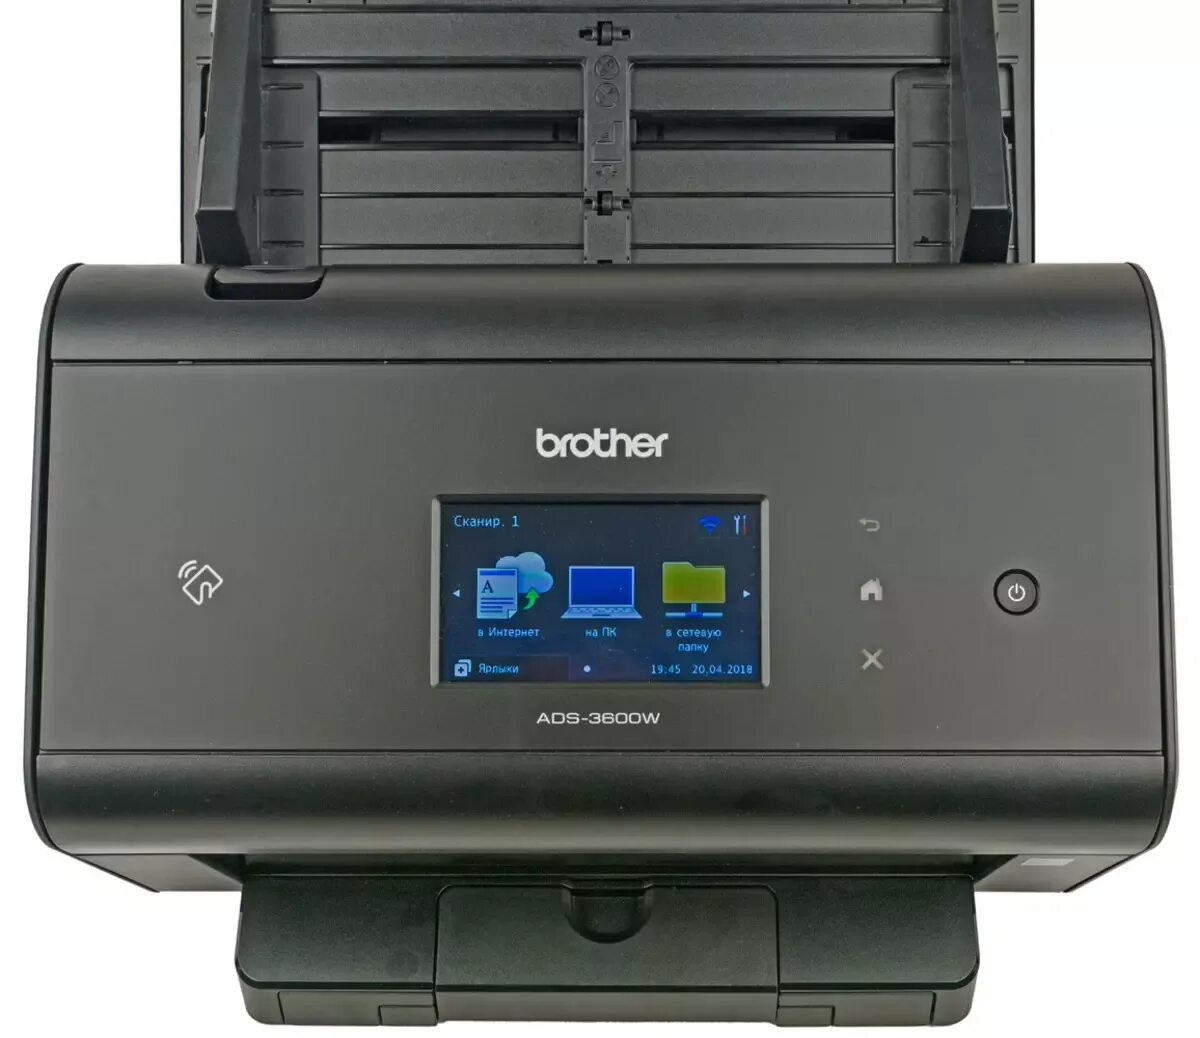 Brother ads. Brother ads-3600w. Сканер brother ads-3600w. Epson 3600. Brother HS 3600.